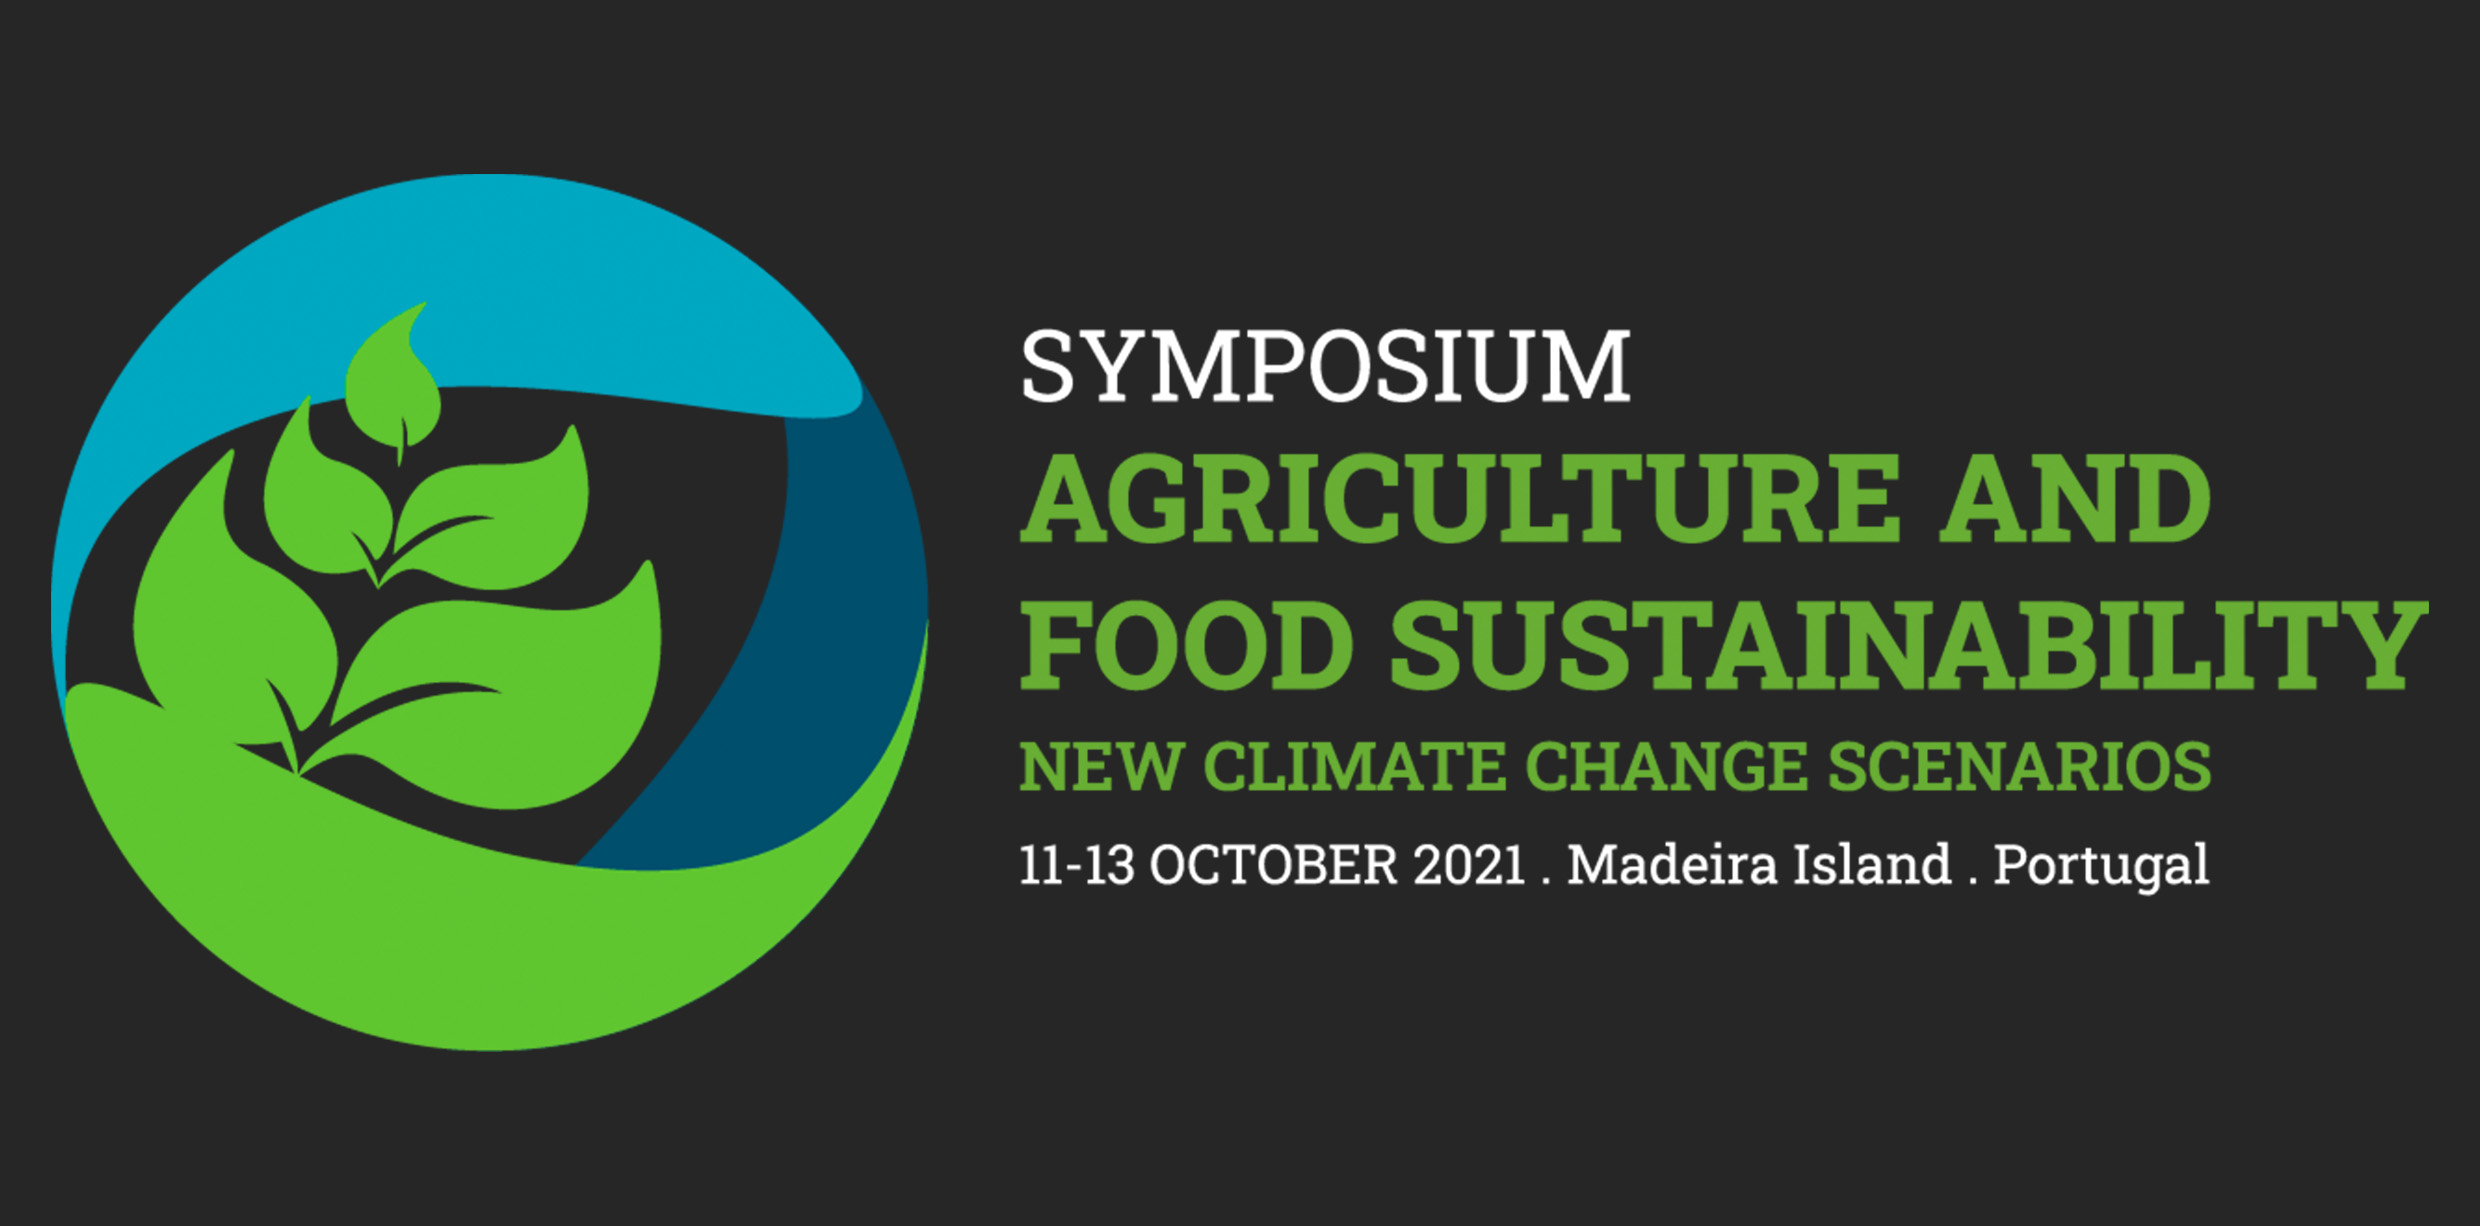 Hybrid Symposium - Agriculture and Food Sustainability: New Climate Change Scenarios